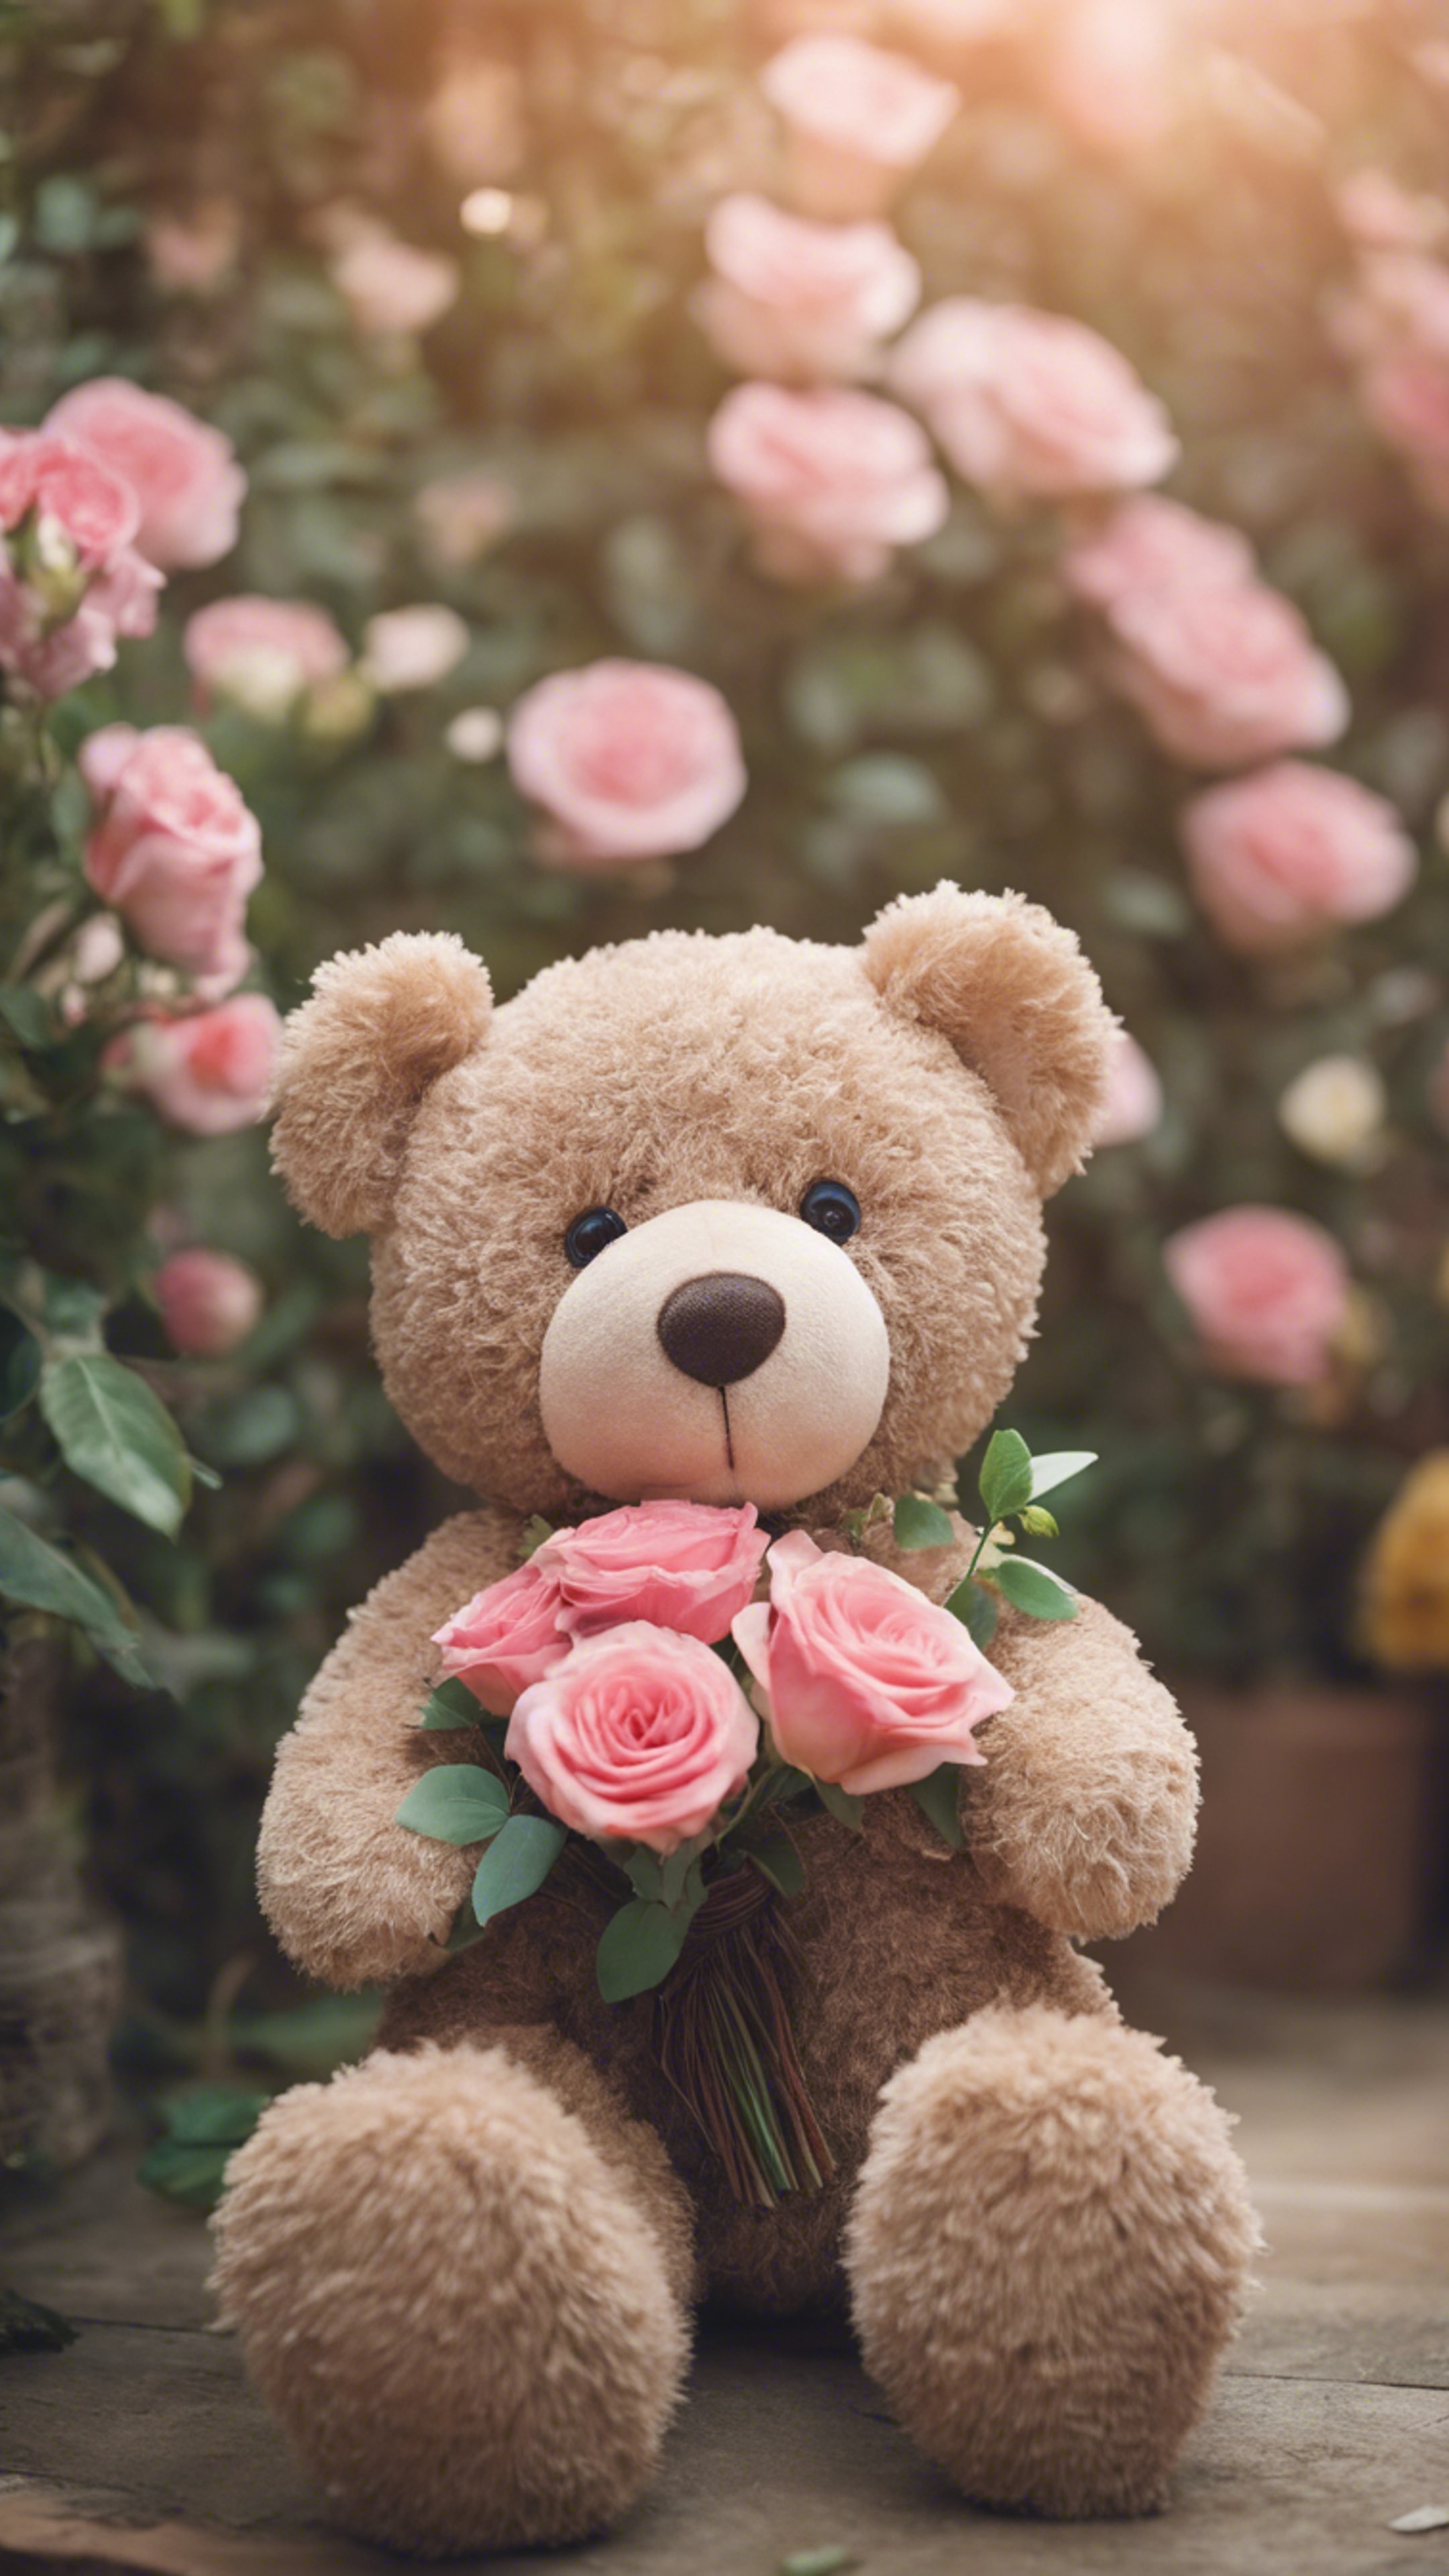 A teddy bear in a romantic setting, holding a bouquet of roses. Шпалери[0c0a94ba405548b0bff3]